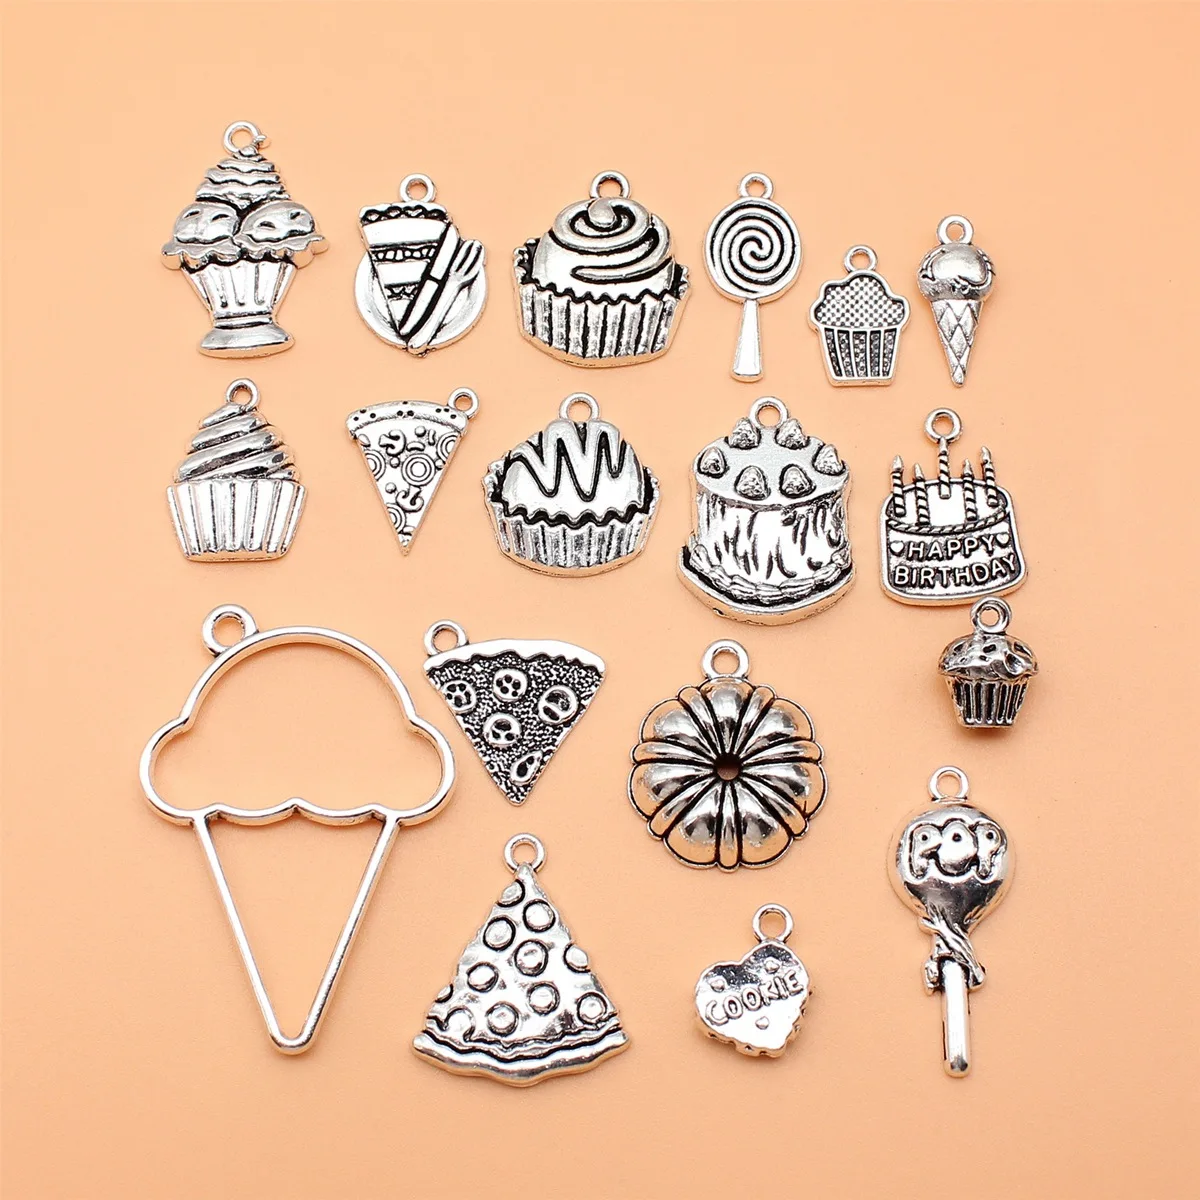 

18pcs Antique Silver Color Cupcake Cookies Pizza Ice Cream Charms Collection For DIY Jewelry Making, 18 Styles, 1 of Each